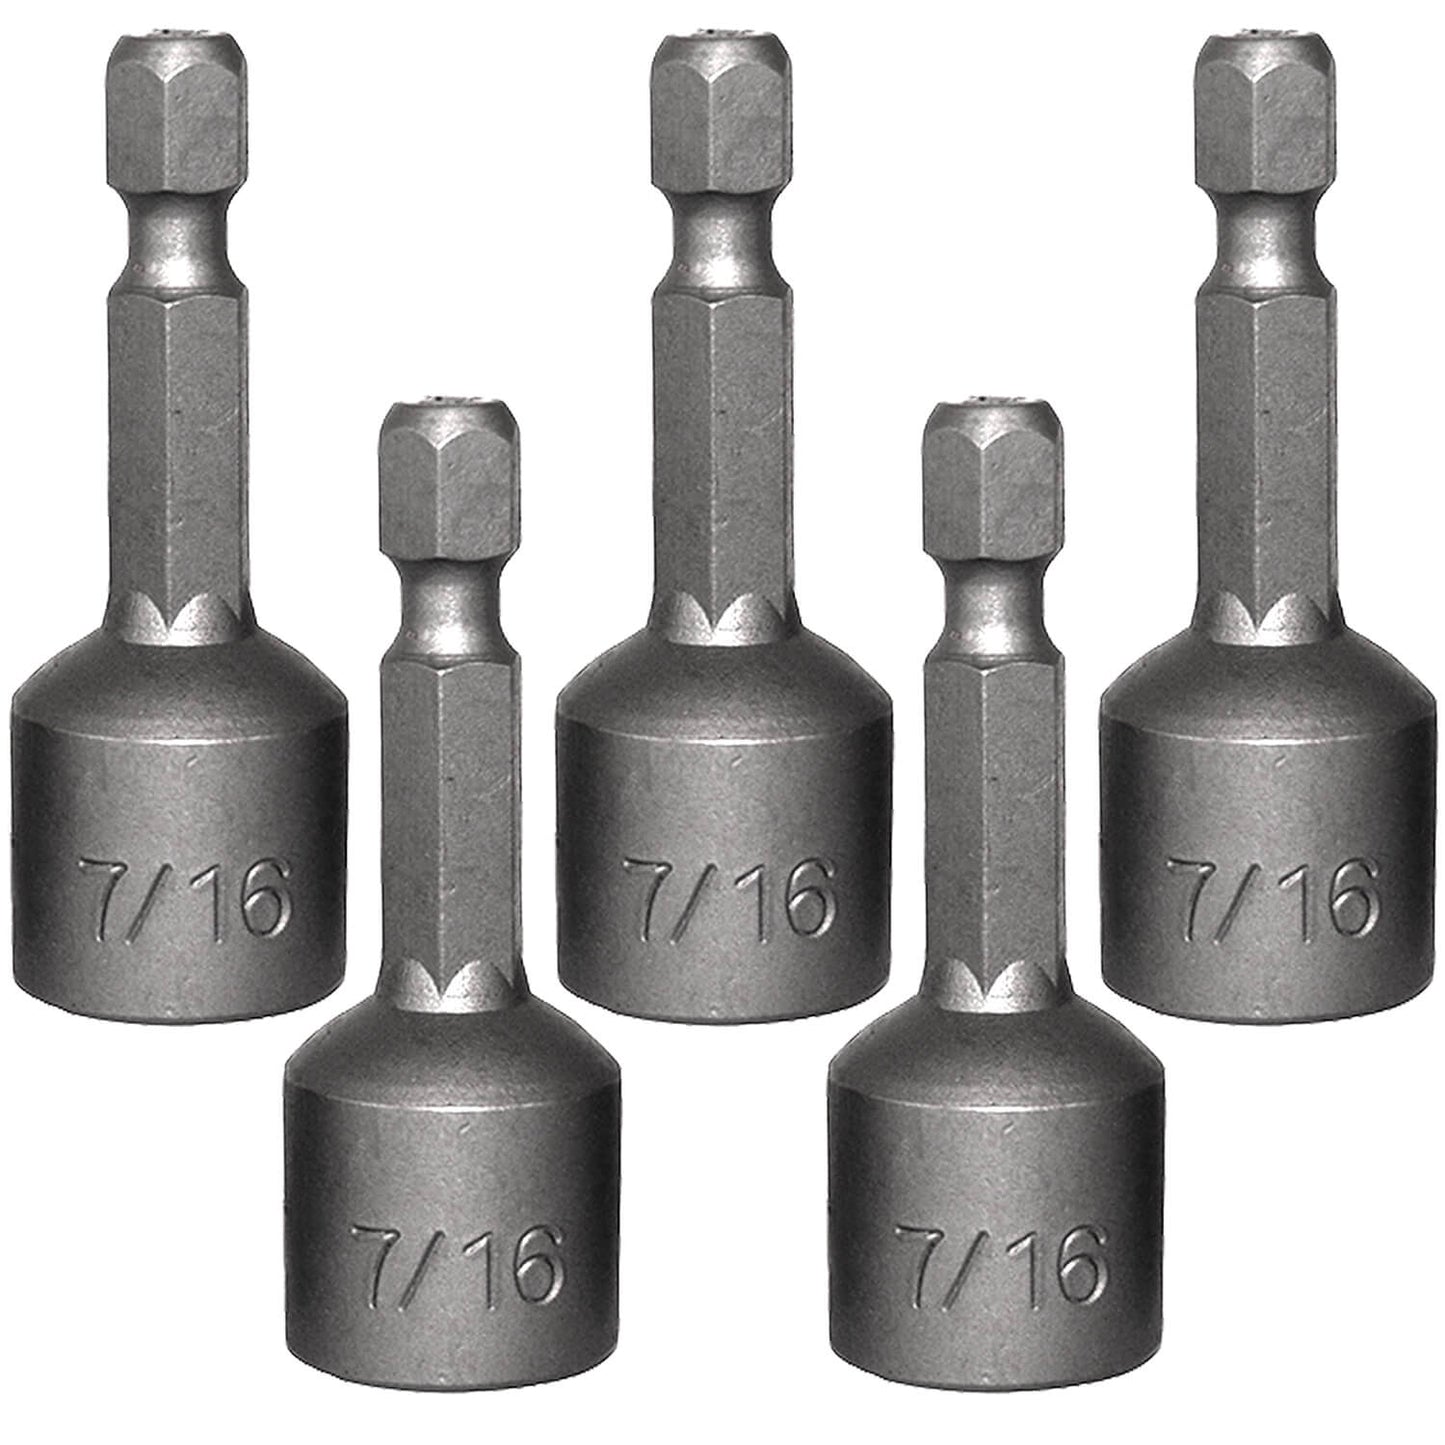 Magnetic Hex Head Driver Bits w/Quick Change Shank - Used for Installing Screws, Nuts, Bolts, etc. - Commonly Used for Metal Roofing Screws